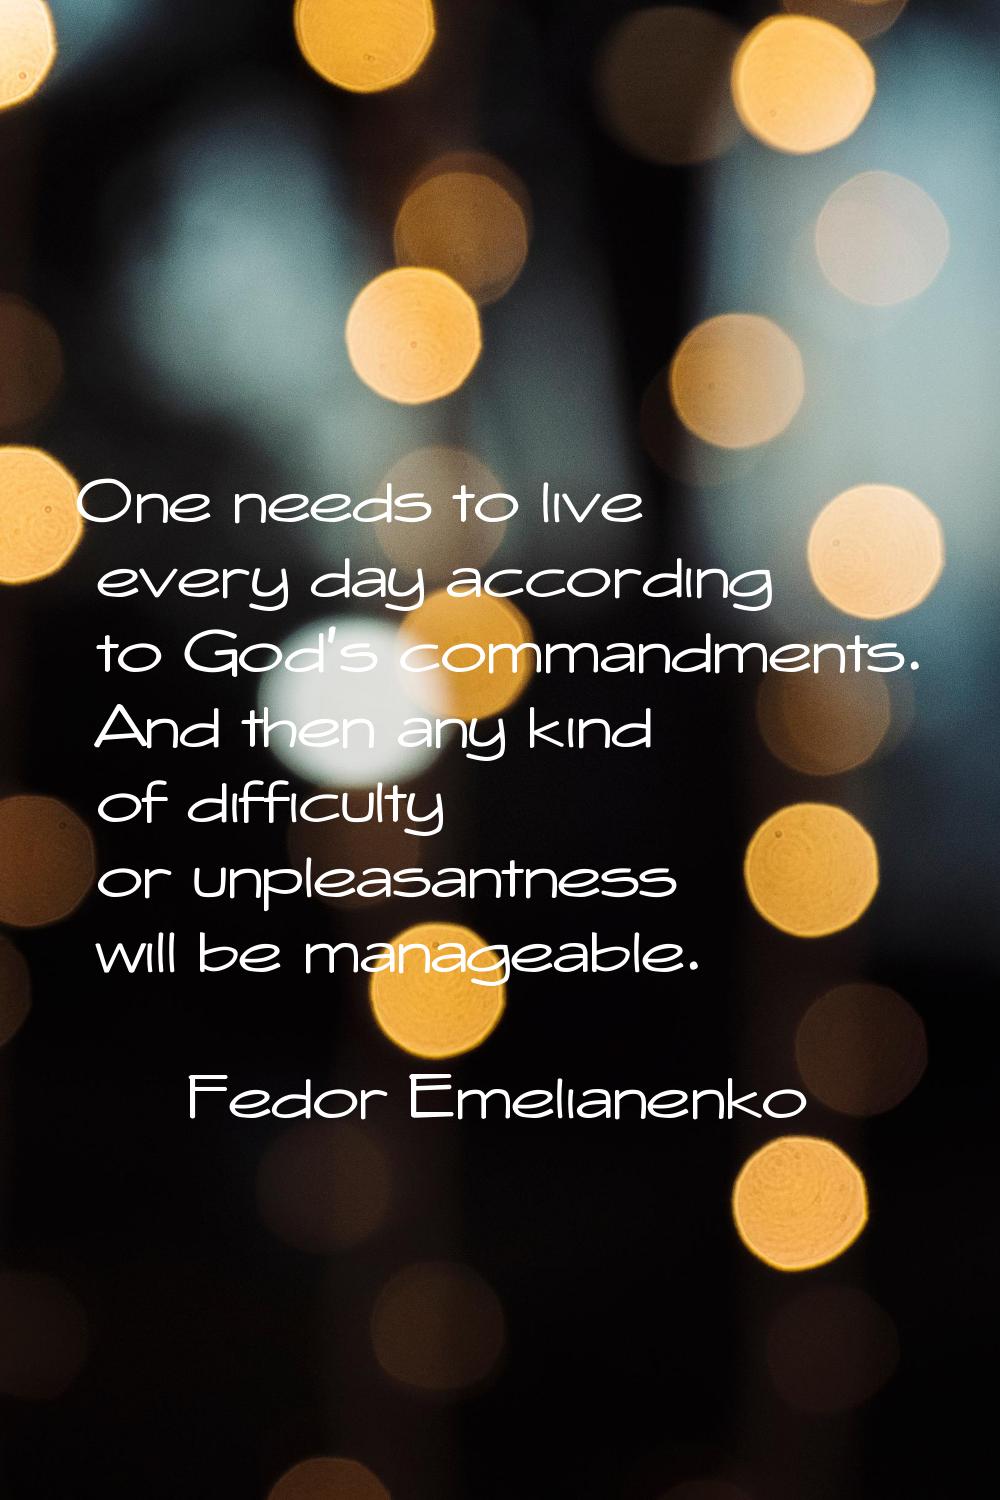 One needs to live every day according to God's commandments. And then any kind of difficulty or unp